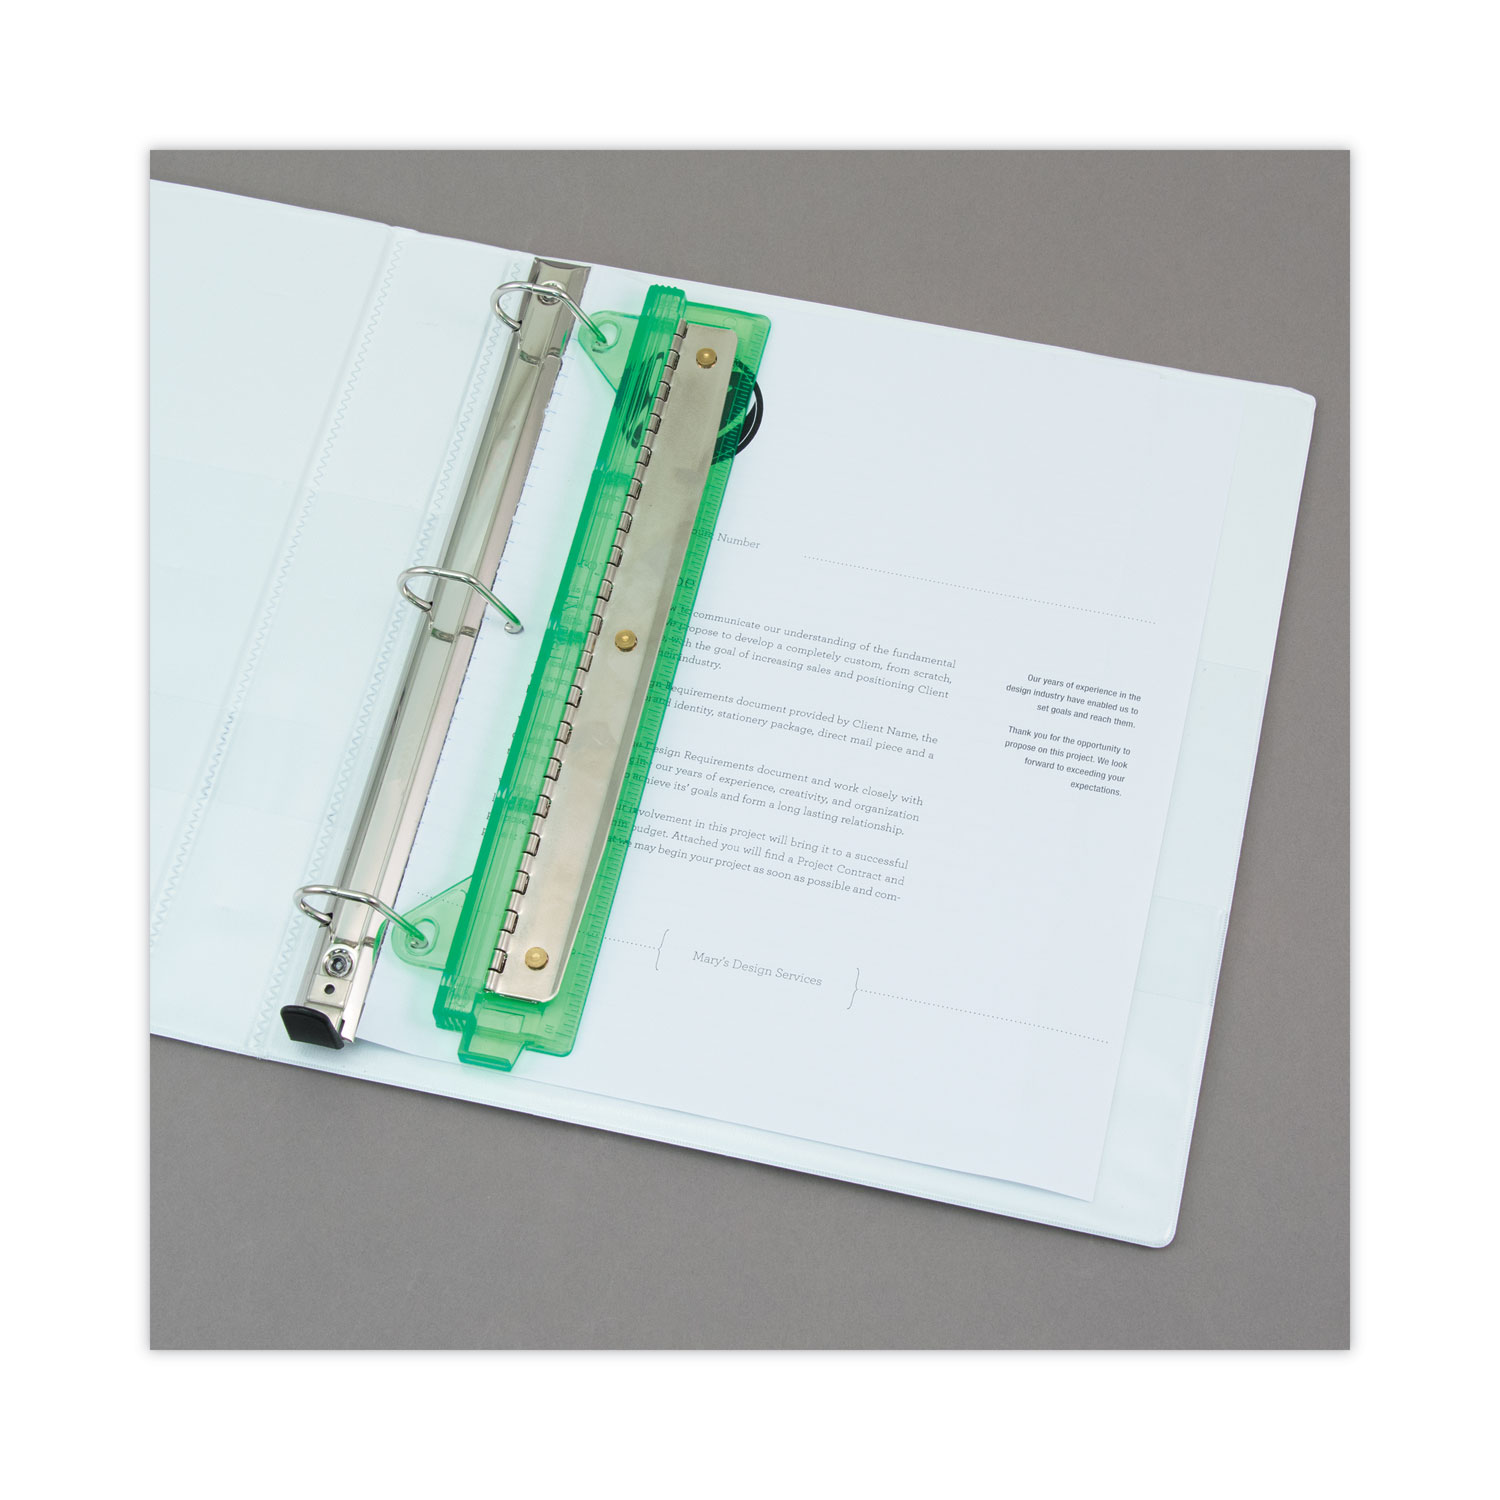 9 Staples 3-Hole Punch Fits in 3-Ring Binders Ruler 3 Sheet